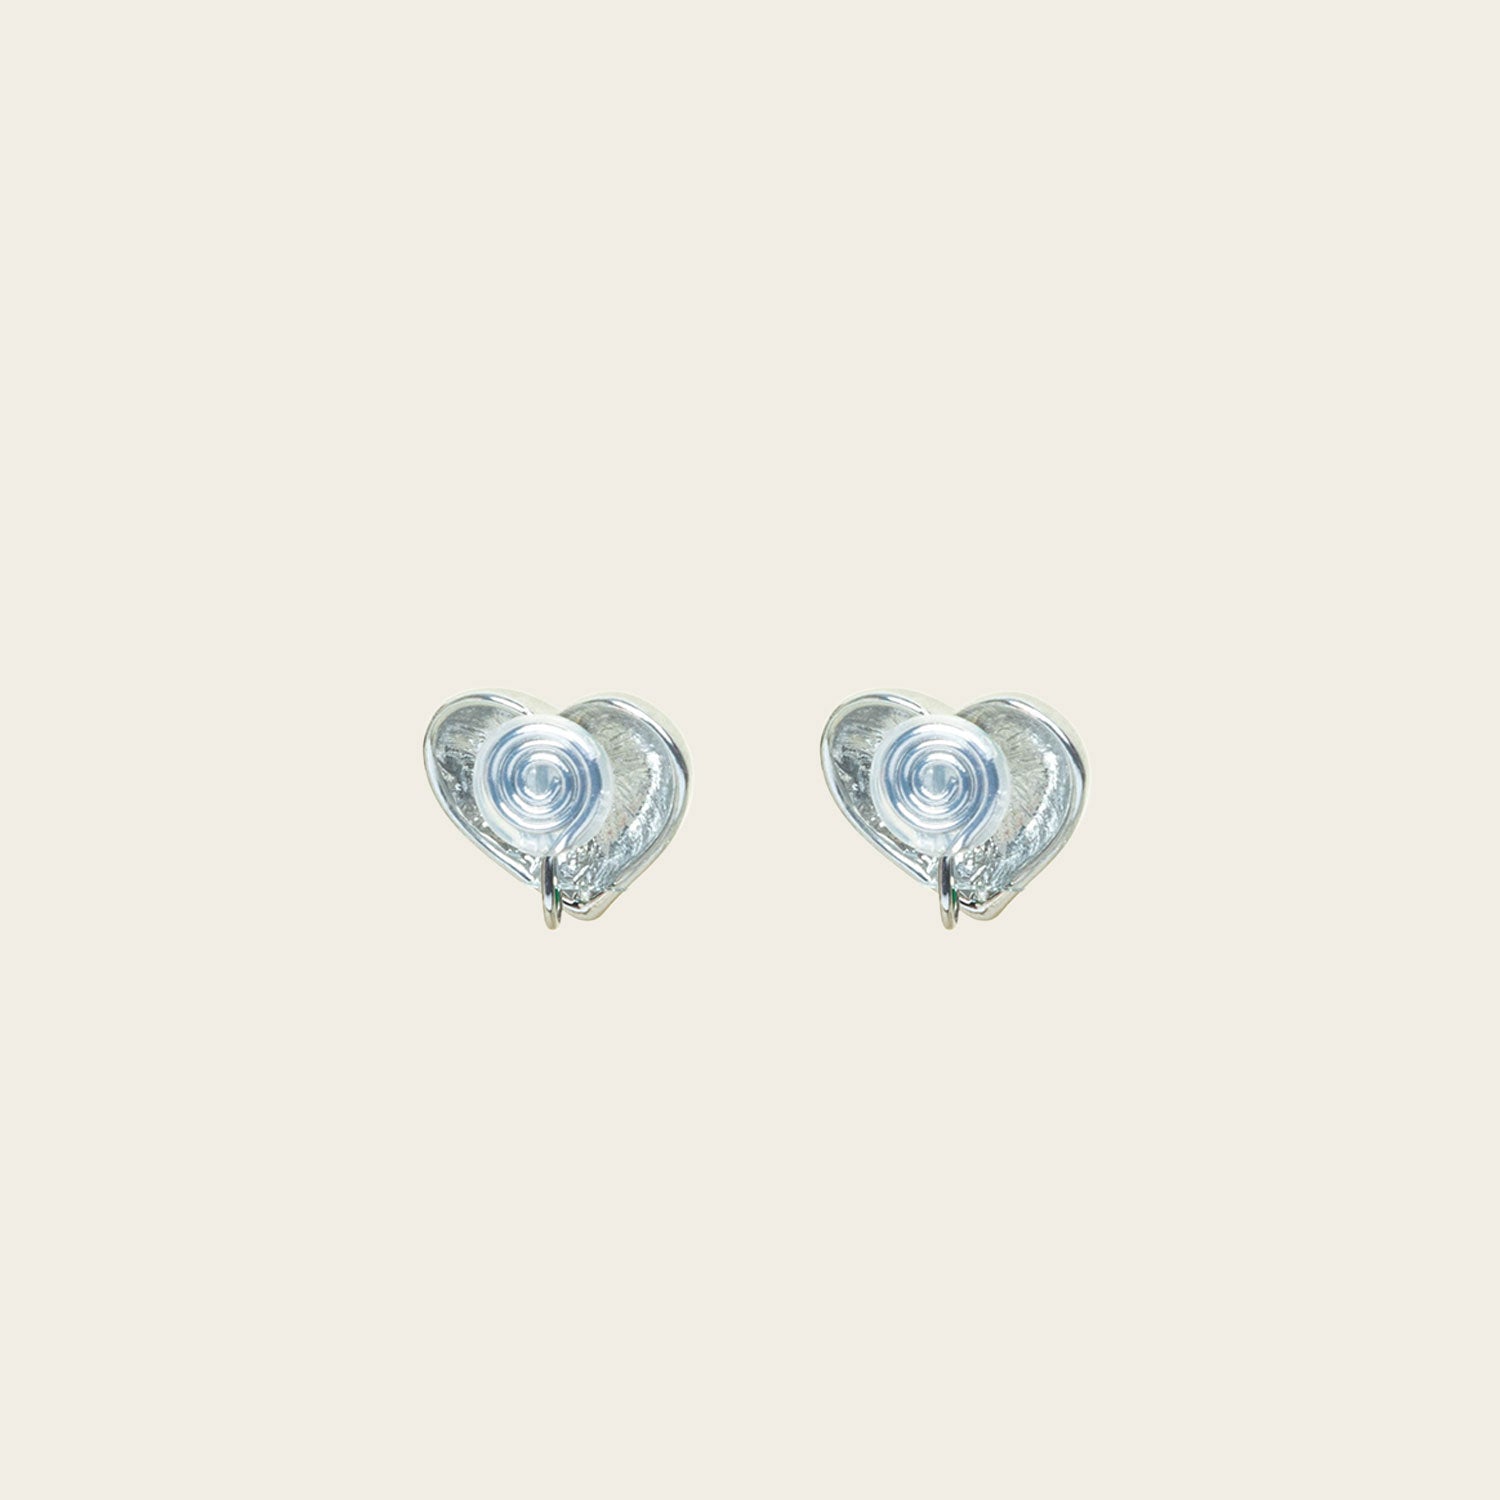 Image of the Coeur Clip On Earrings in Silver offer a medium-strength, adjustable hold via a mosquito coil clip. Ideal for all ear types, these earrings provide a secure yet comfortable fit for up to 24 hours. Crafted with Zinc Alloy and Copper, each purchase contains a single pair.